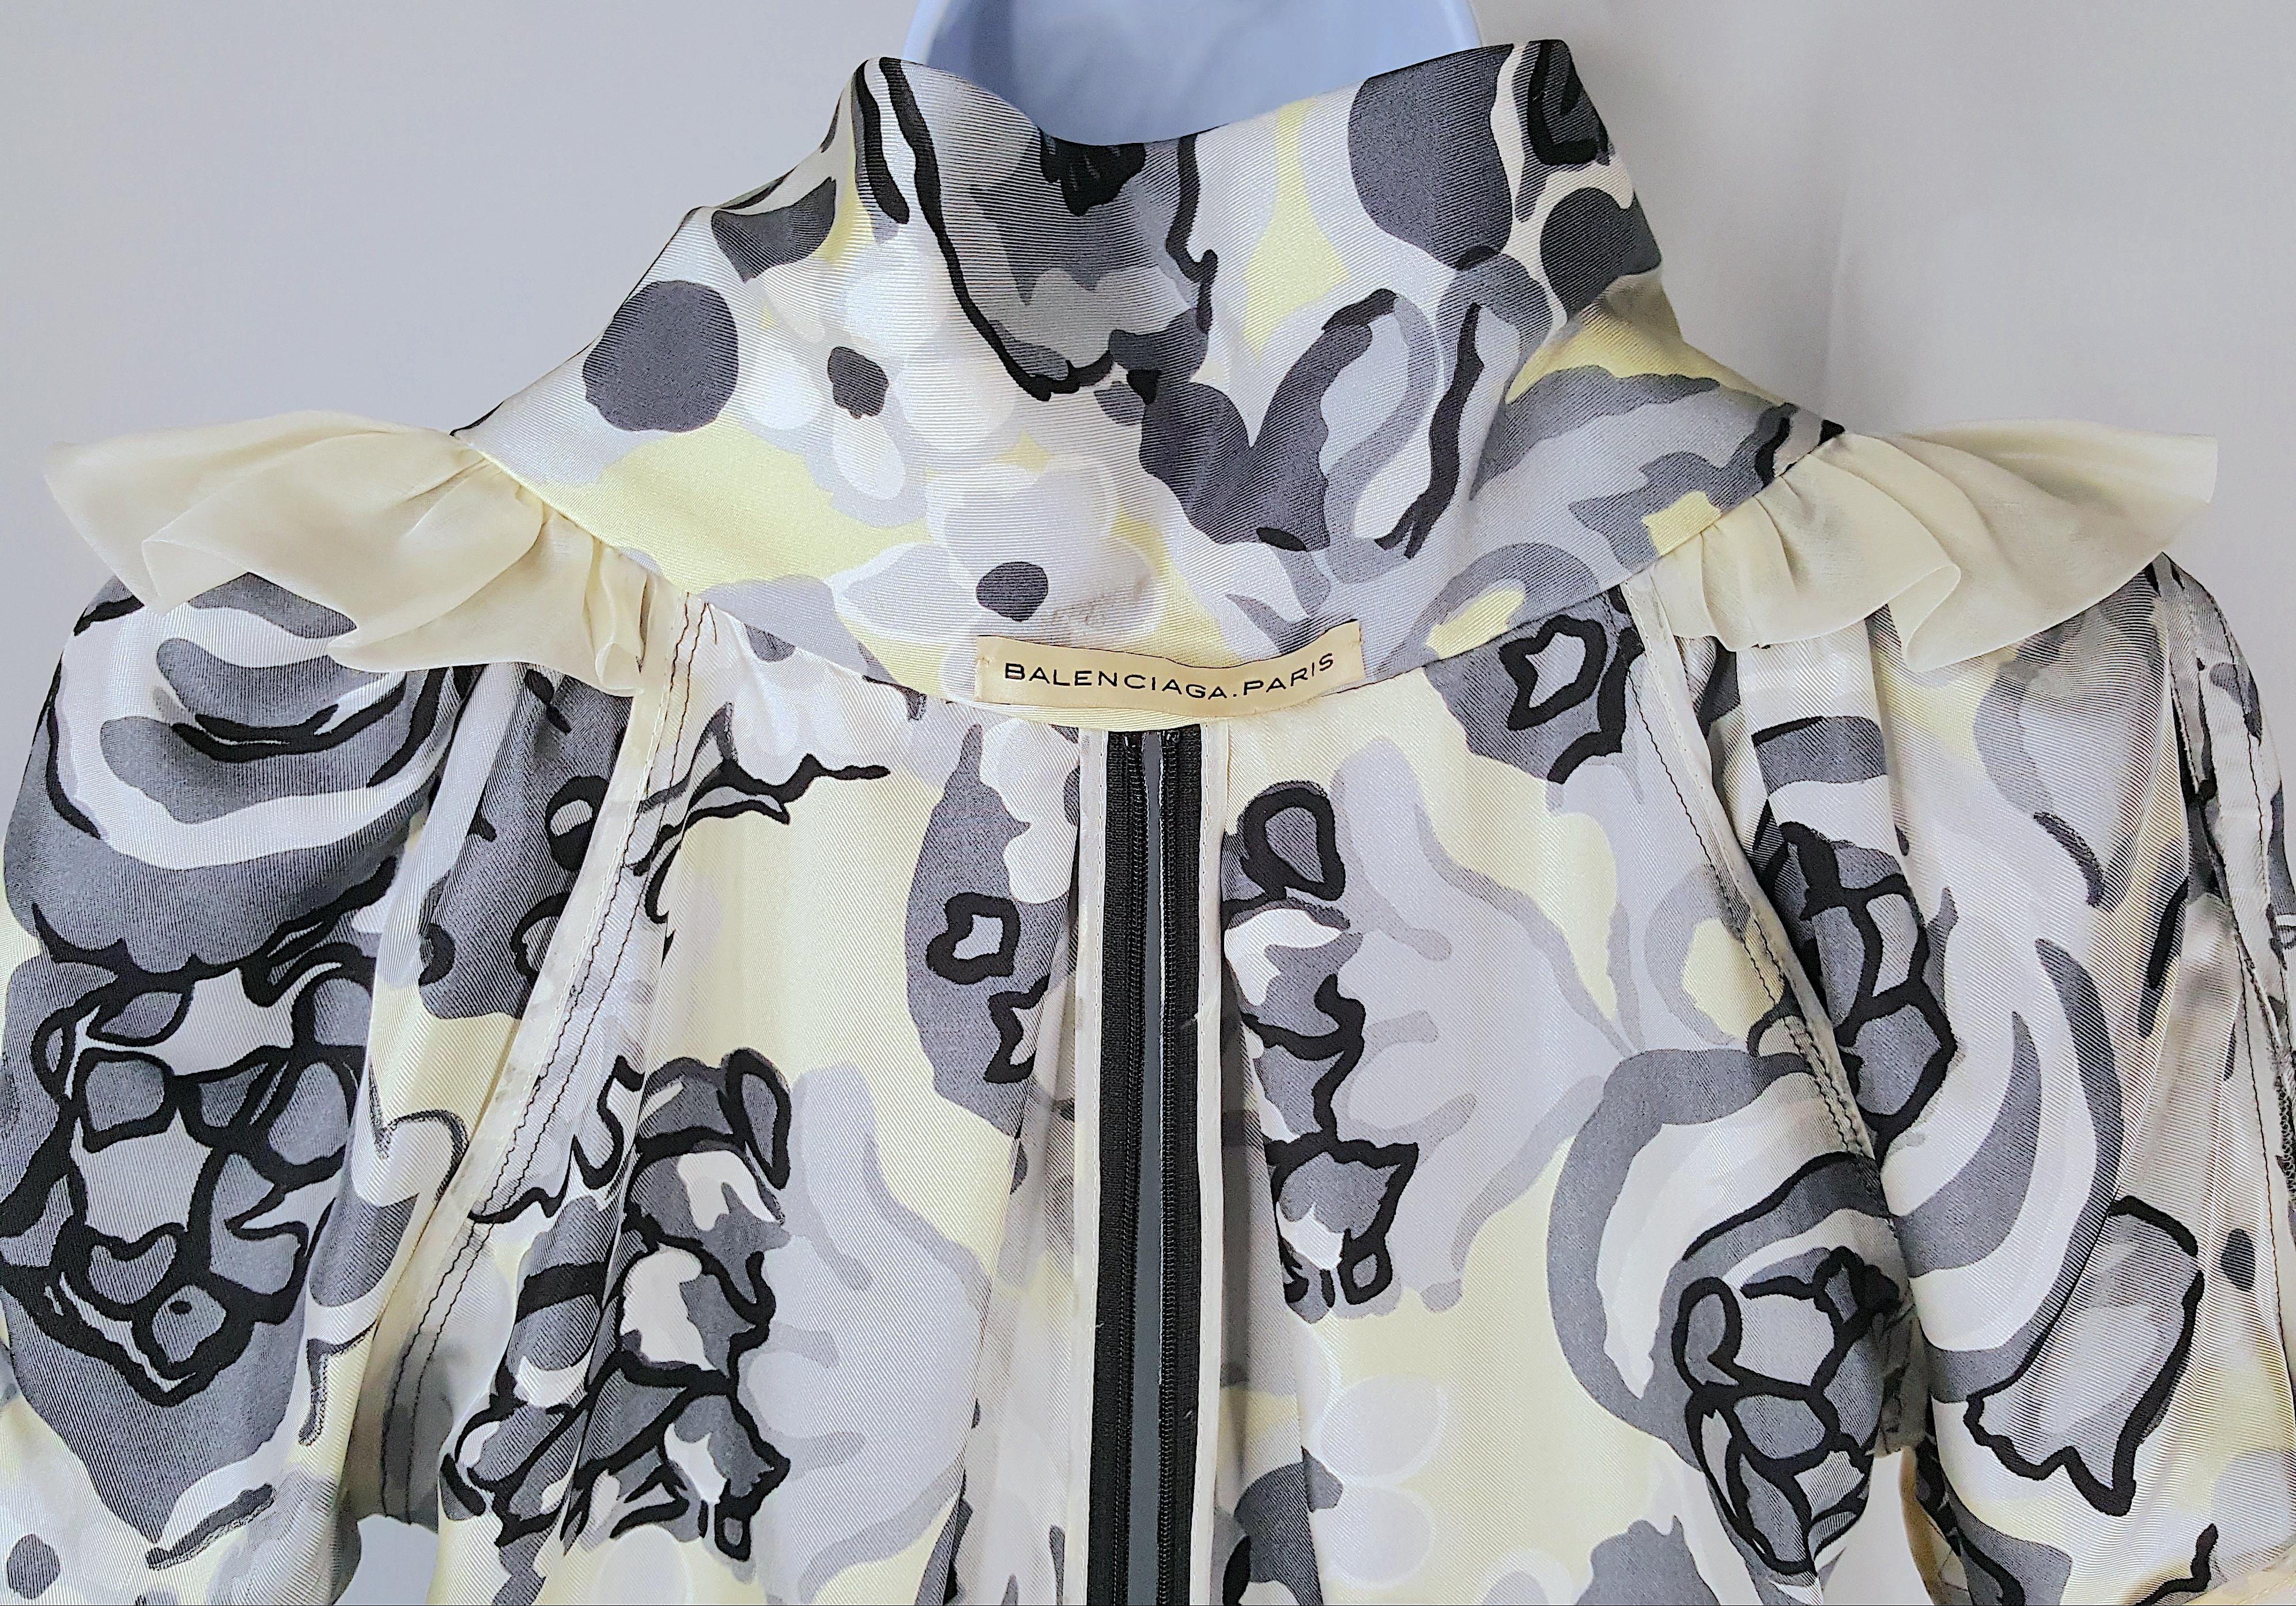 While at Balenciaga in late 2007, Nicolas Ghesquiere designed this 100%-silk bias-cut paneled dress that explodes with a grey and pale-yellow flower print and features unique technically-intricate construction on par with couture. With complex